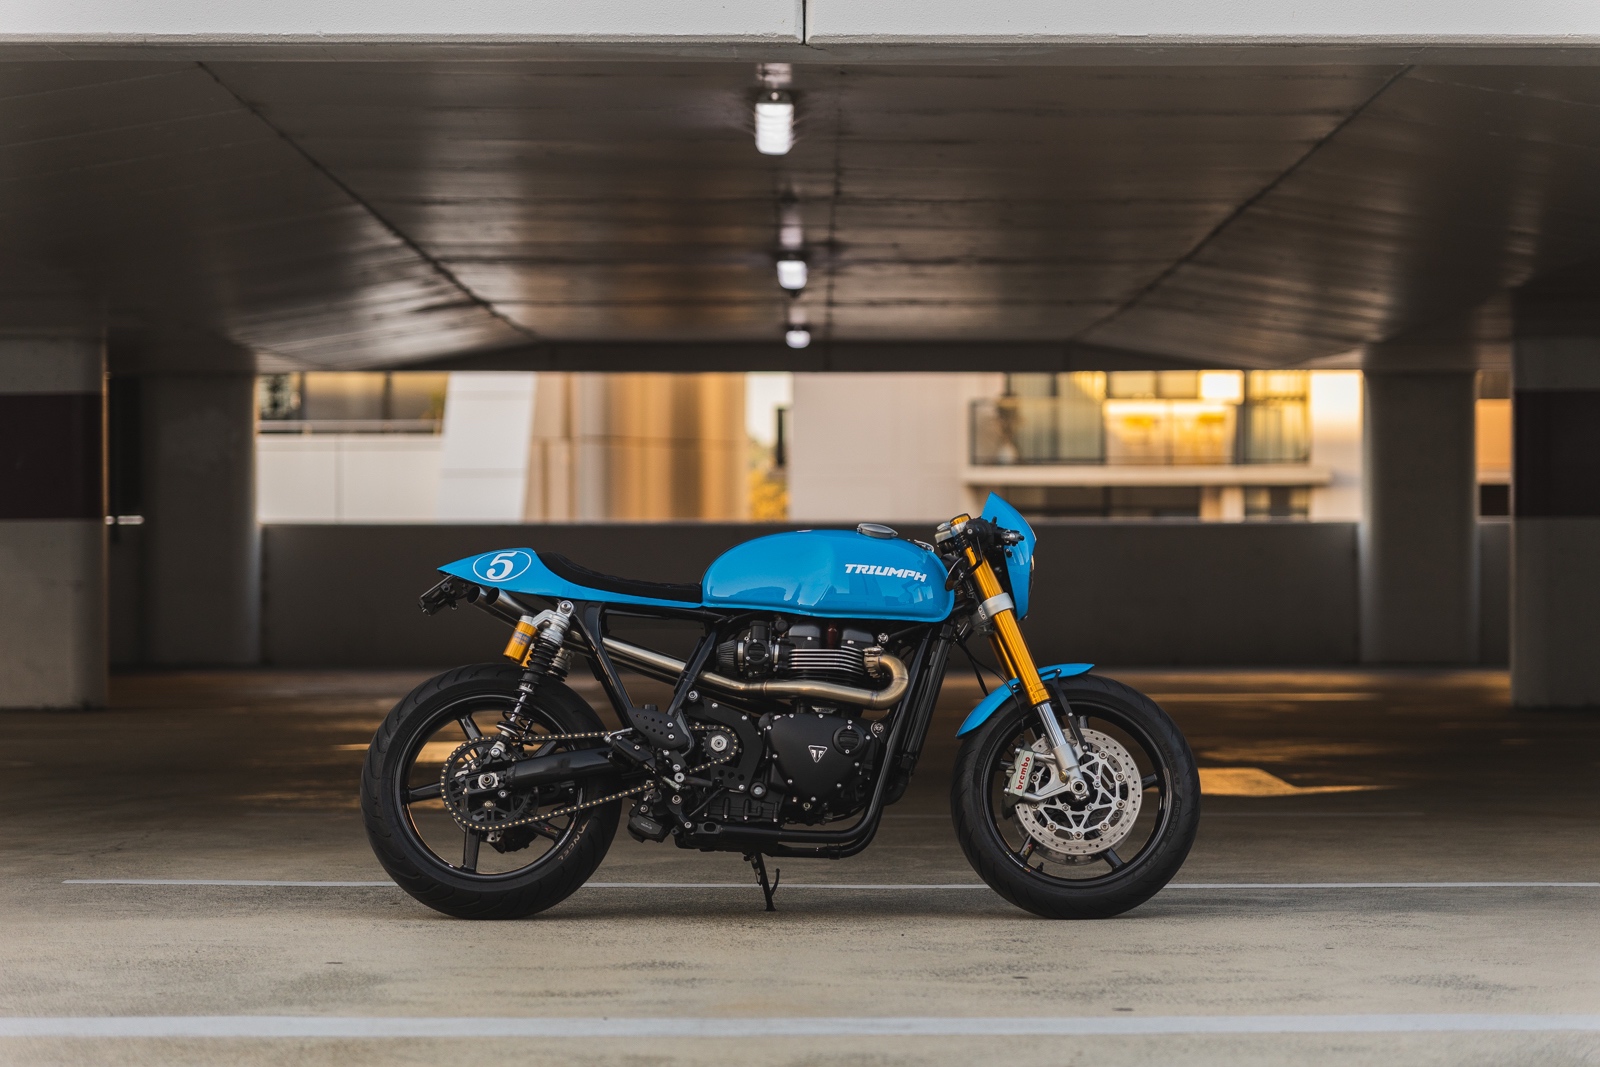 Side view photo of a Triumph Thruxton R Custom Motorcycle in a parking garage